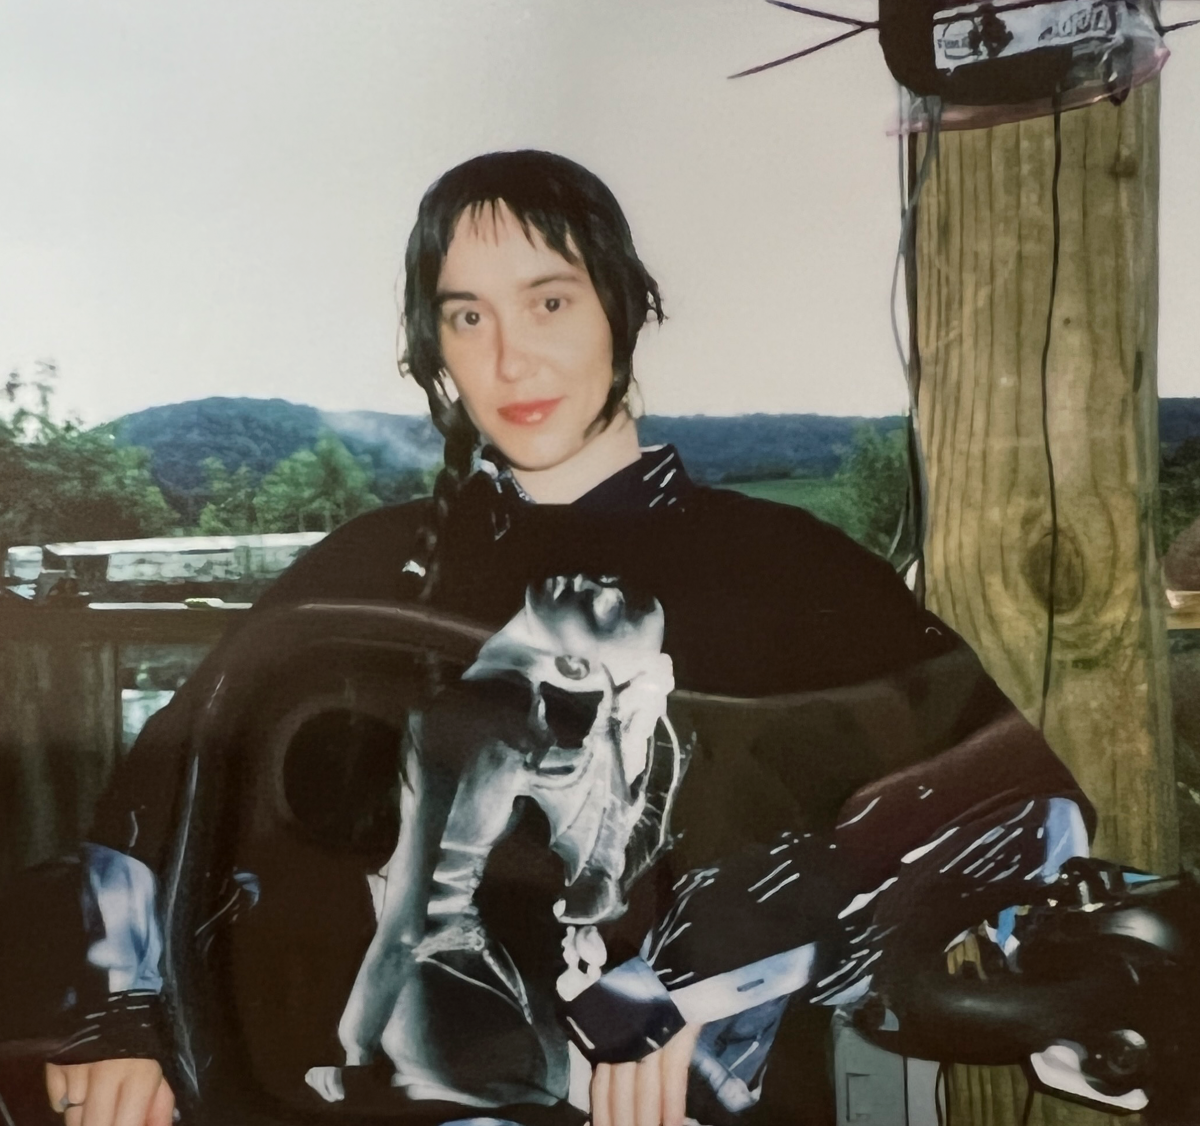 Poloroid of a white, non-binary person with dark brown hair and an Eartheater t-shirt, sitting in front of green hills.